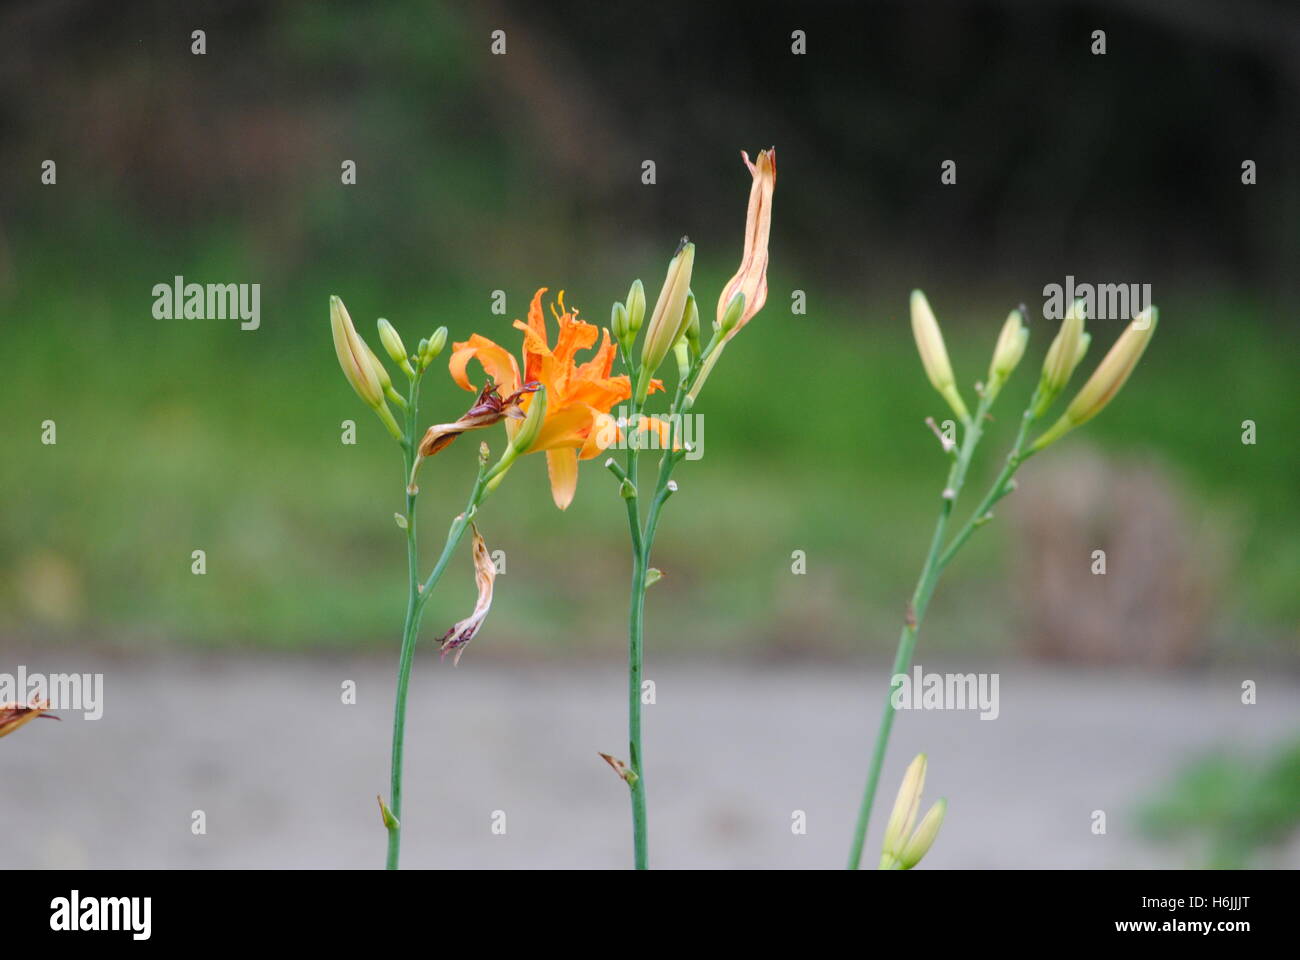 DAY LILIES, WITHERING AWAY SLOWLY, IN THE FALL SEASON. Stock Photo